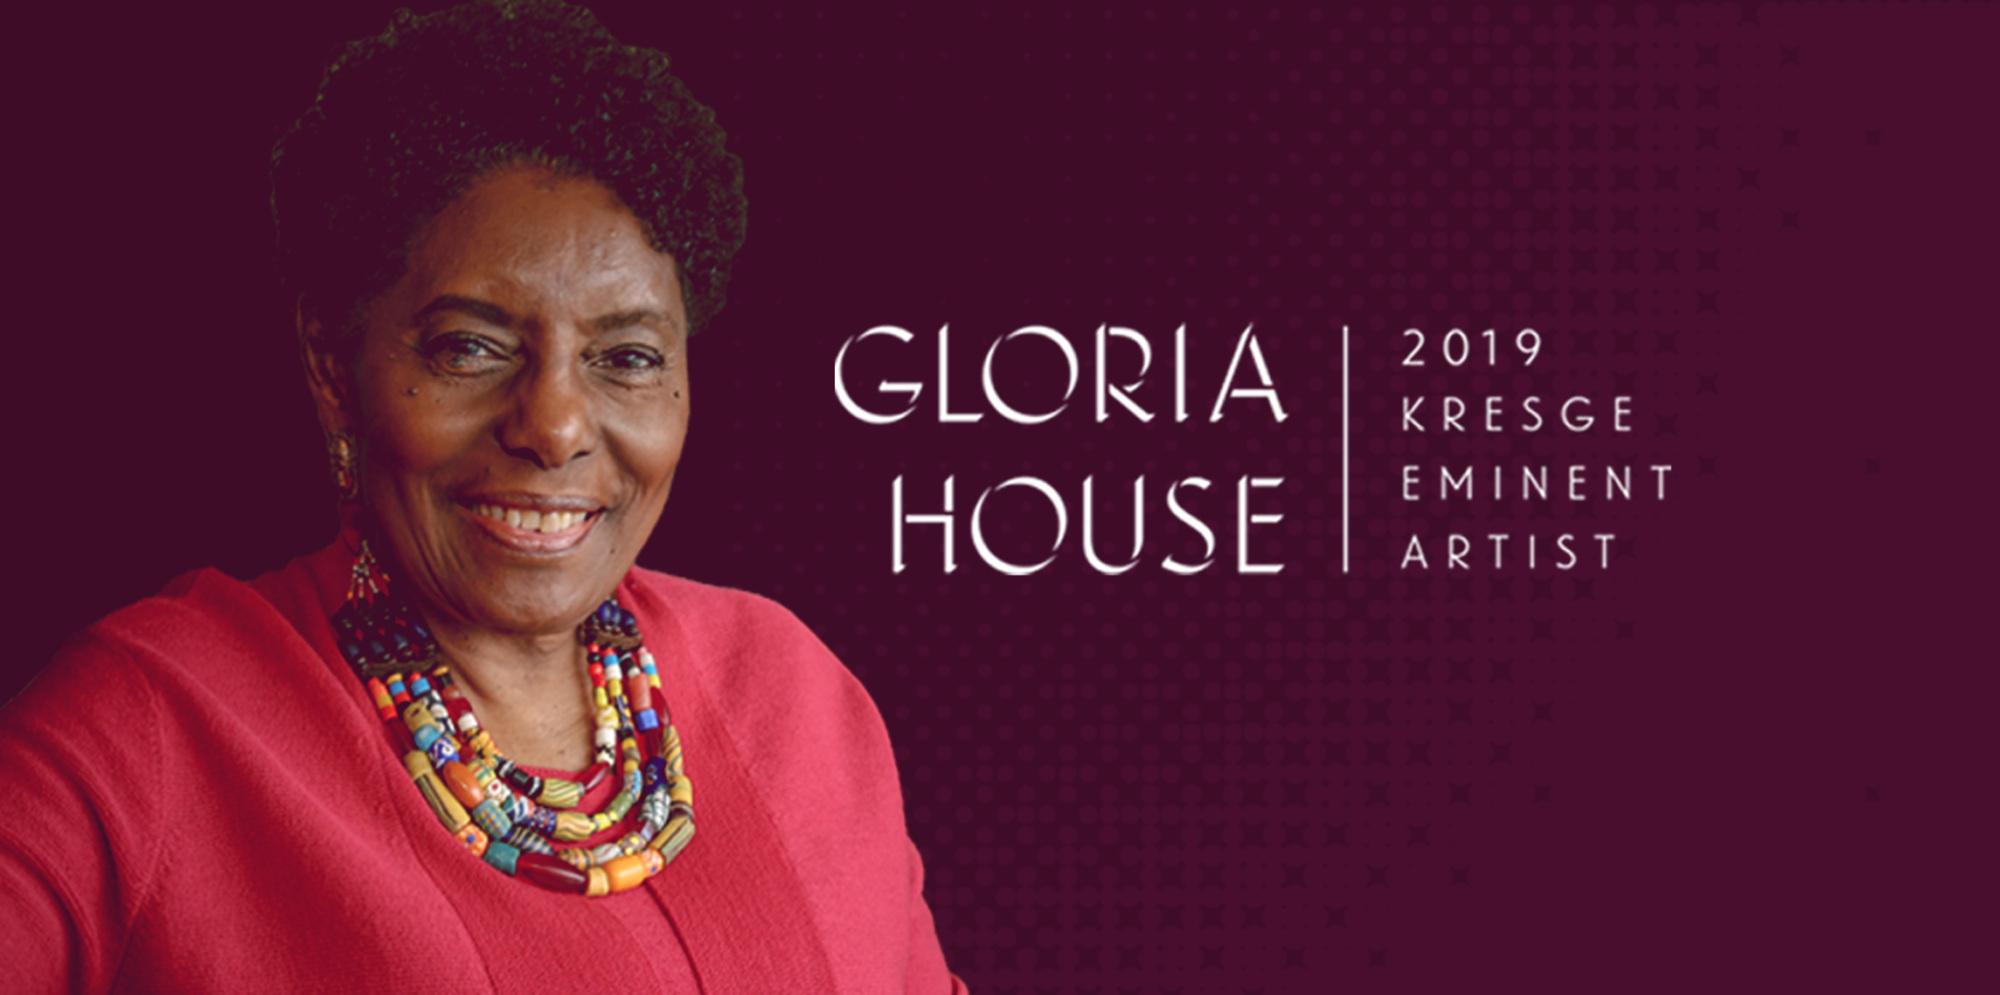 Image of Gloria House with text "2019 Kresge Eminent Artist"